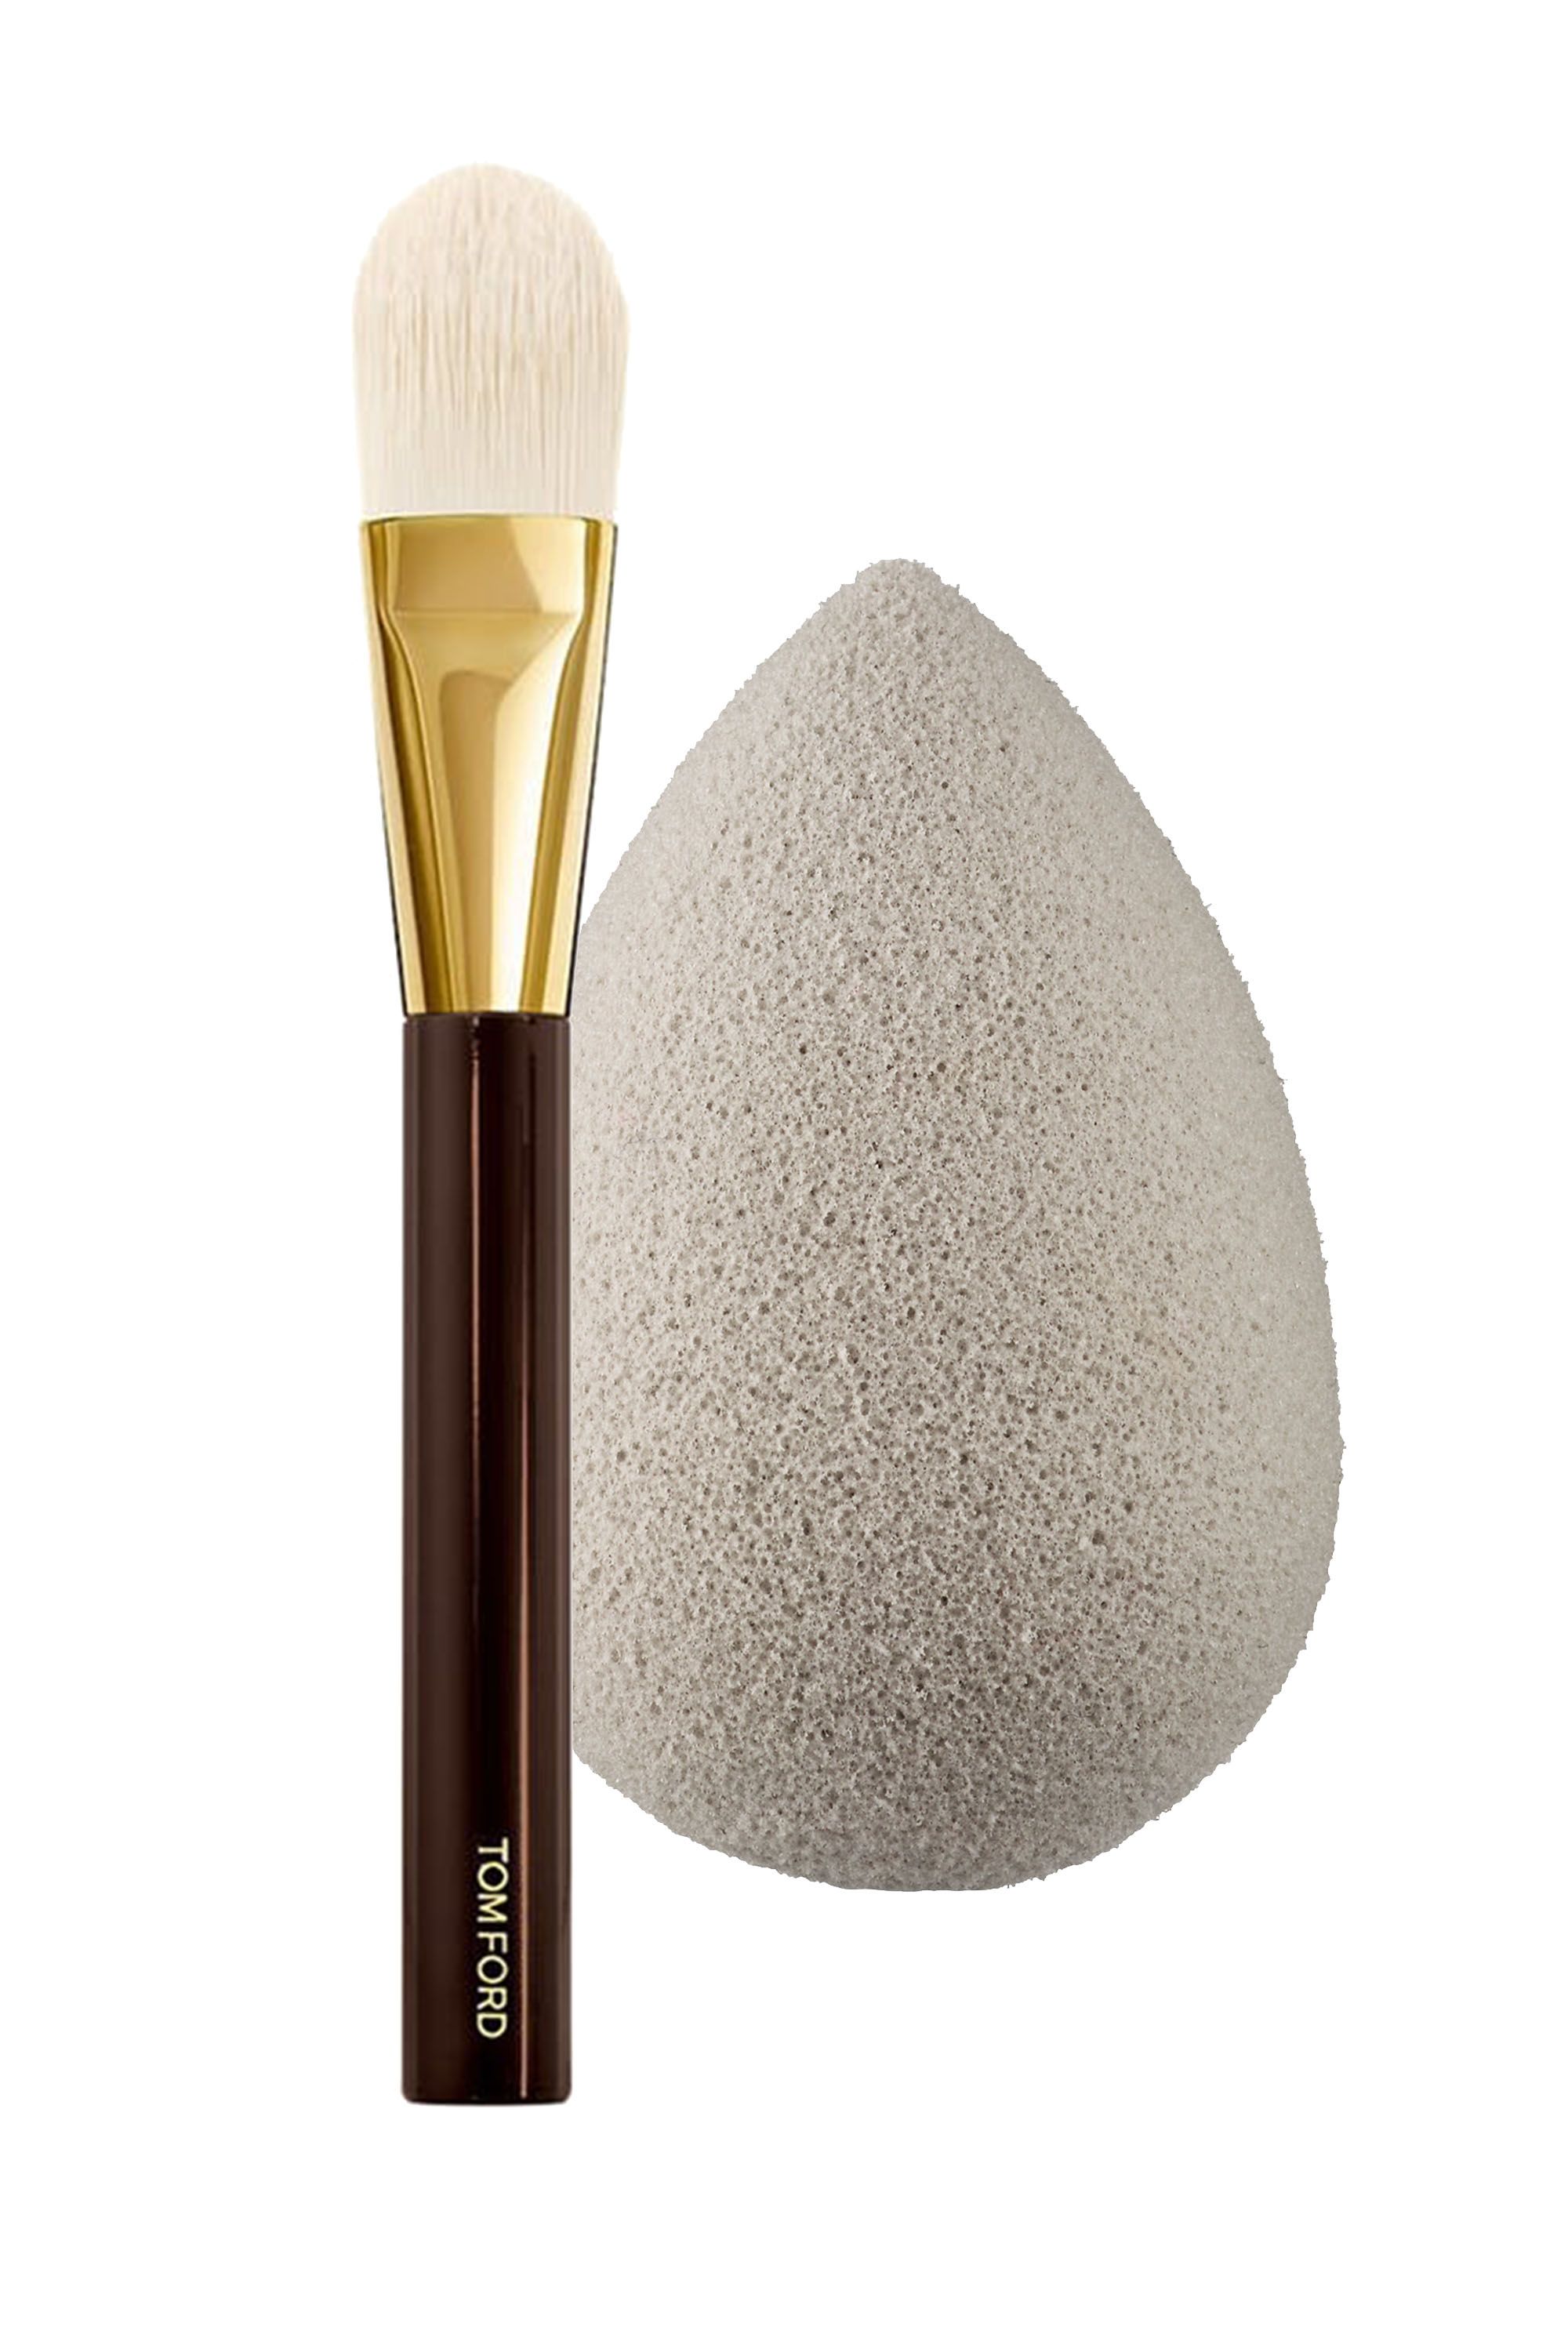 5 Best Foundation Brushes, Sponges and Blenders - How to Apply Foundation  Makeup